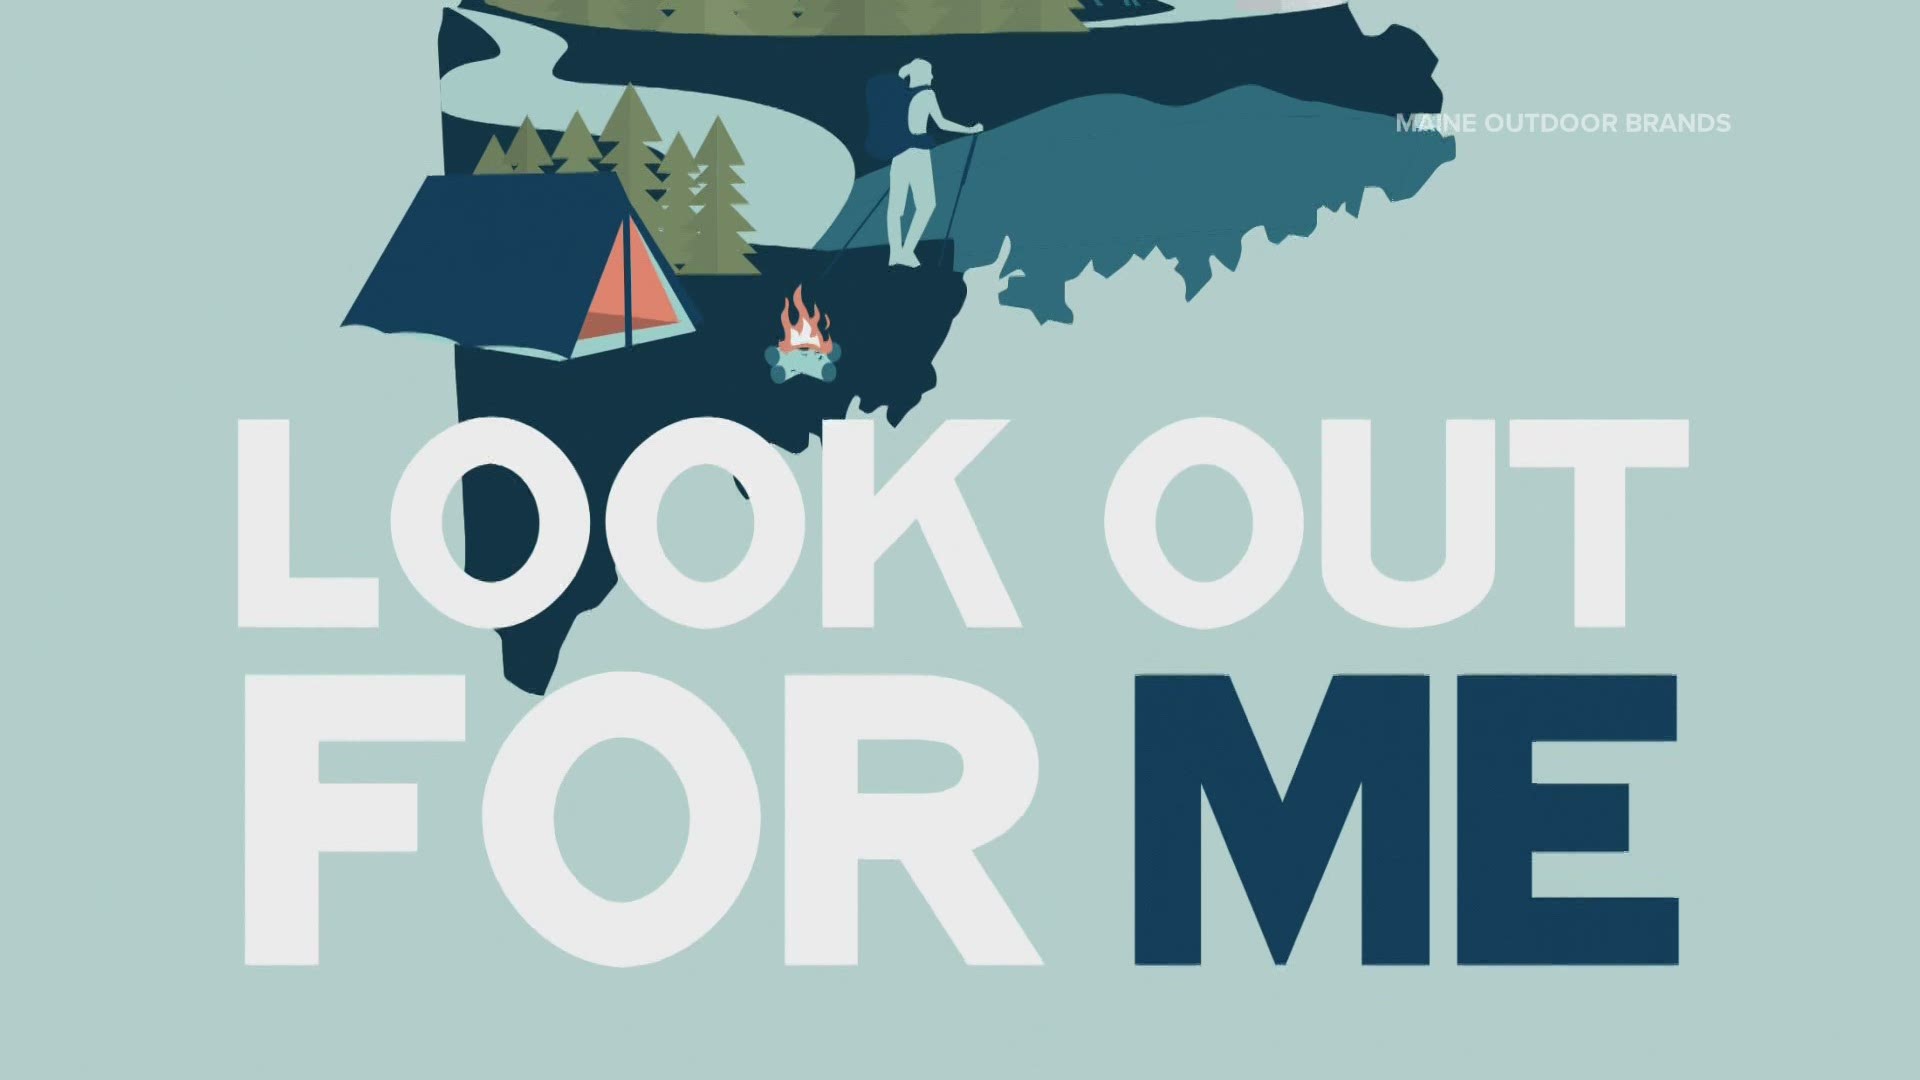 The Maine Office of Tourism and Office of Outdoor Recreation teamed up to launch the "Look Out For Me" campaign.